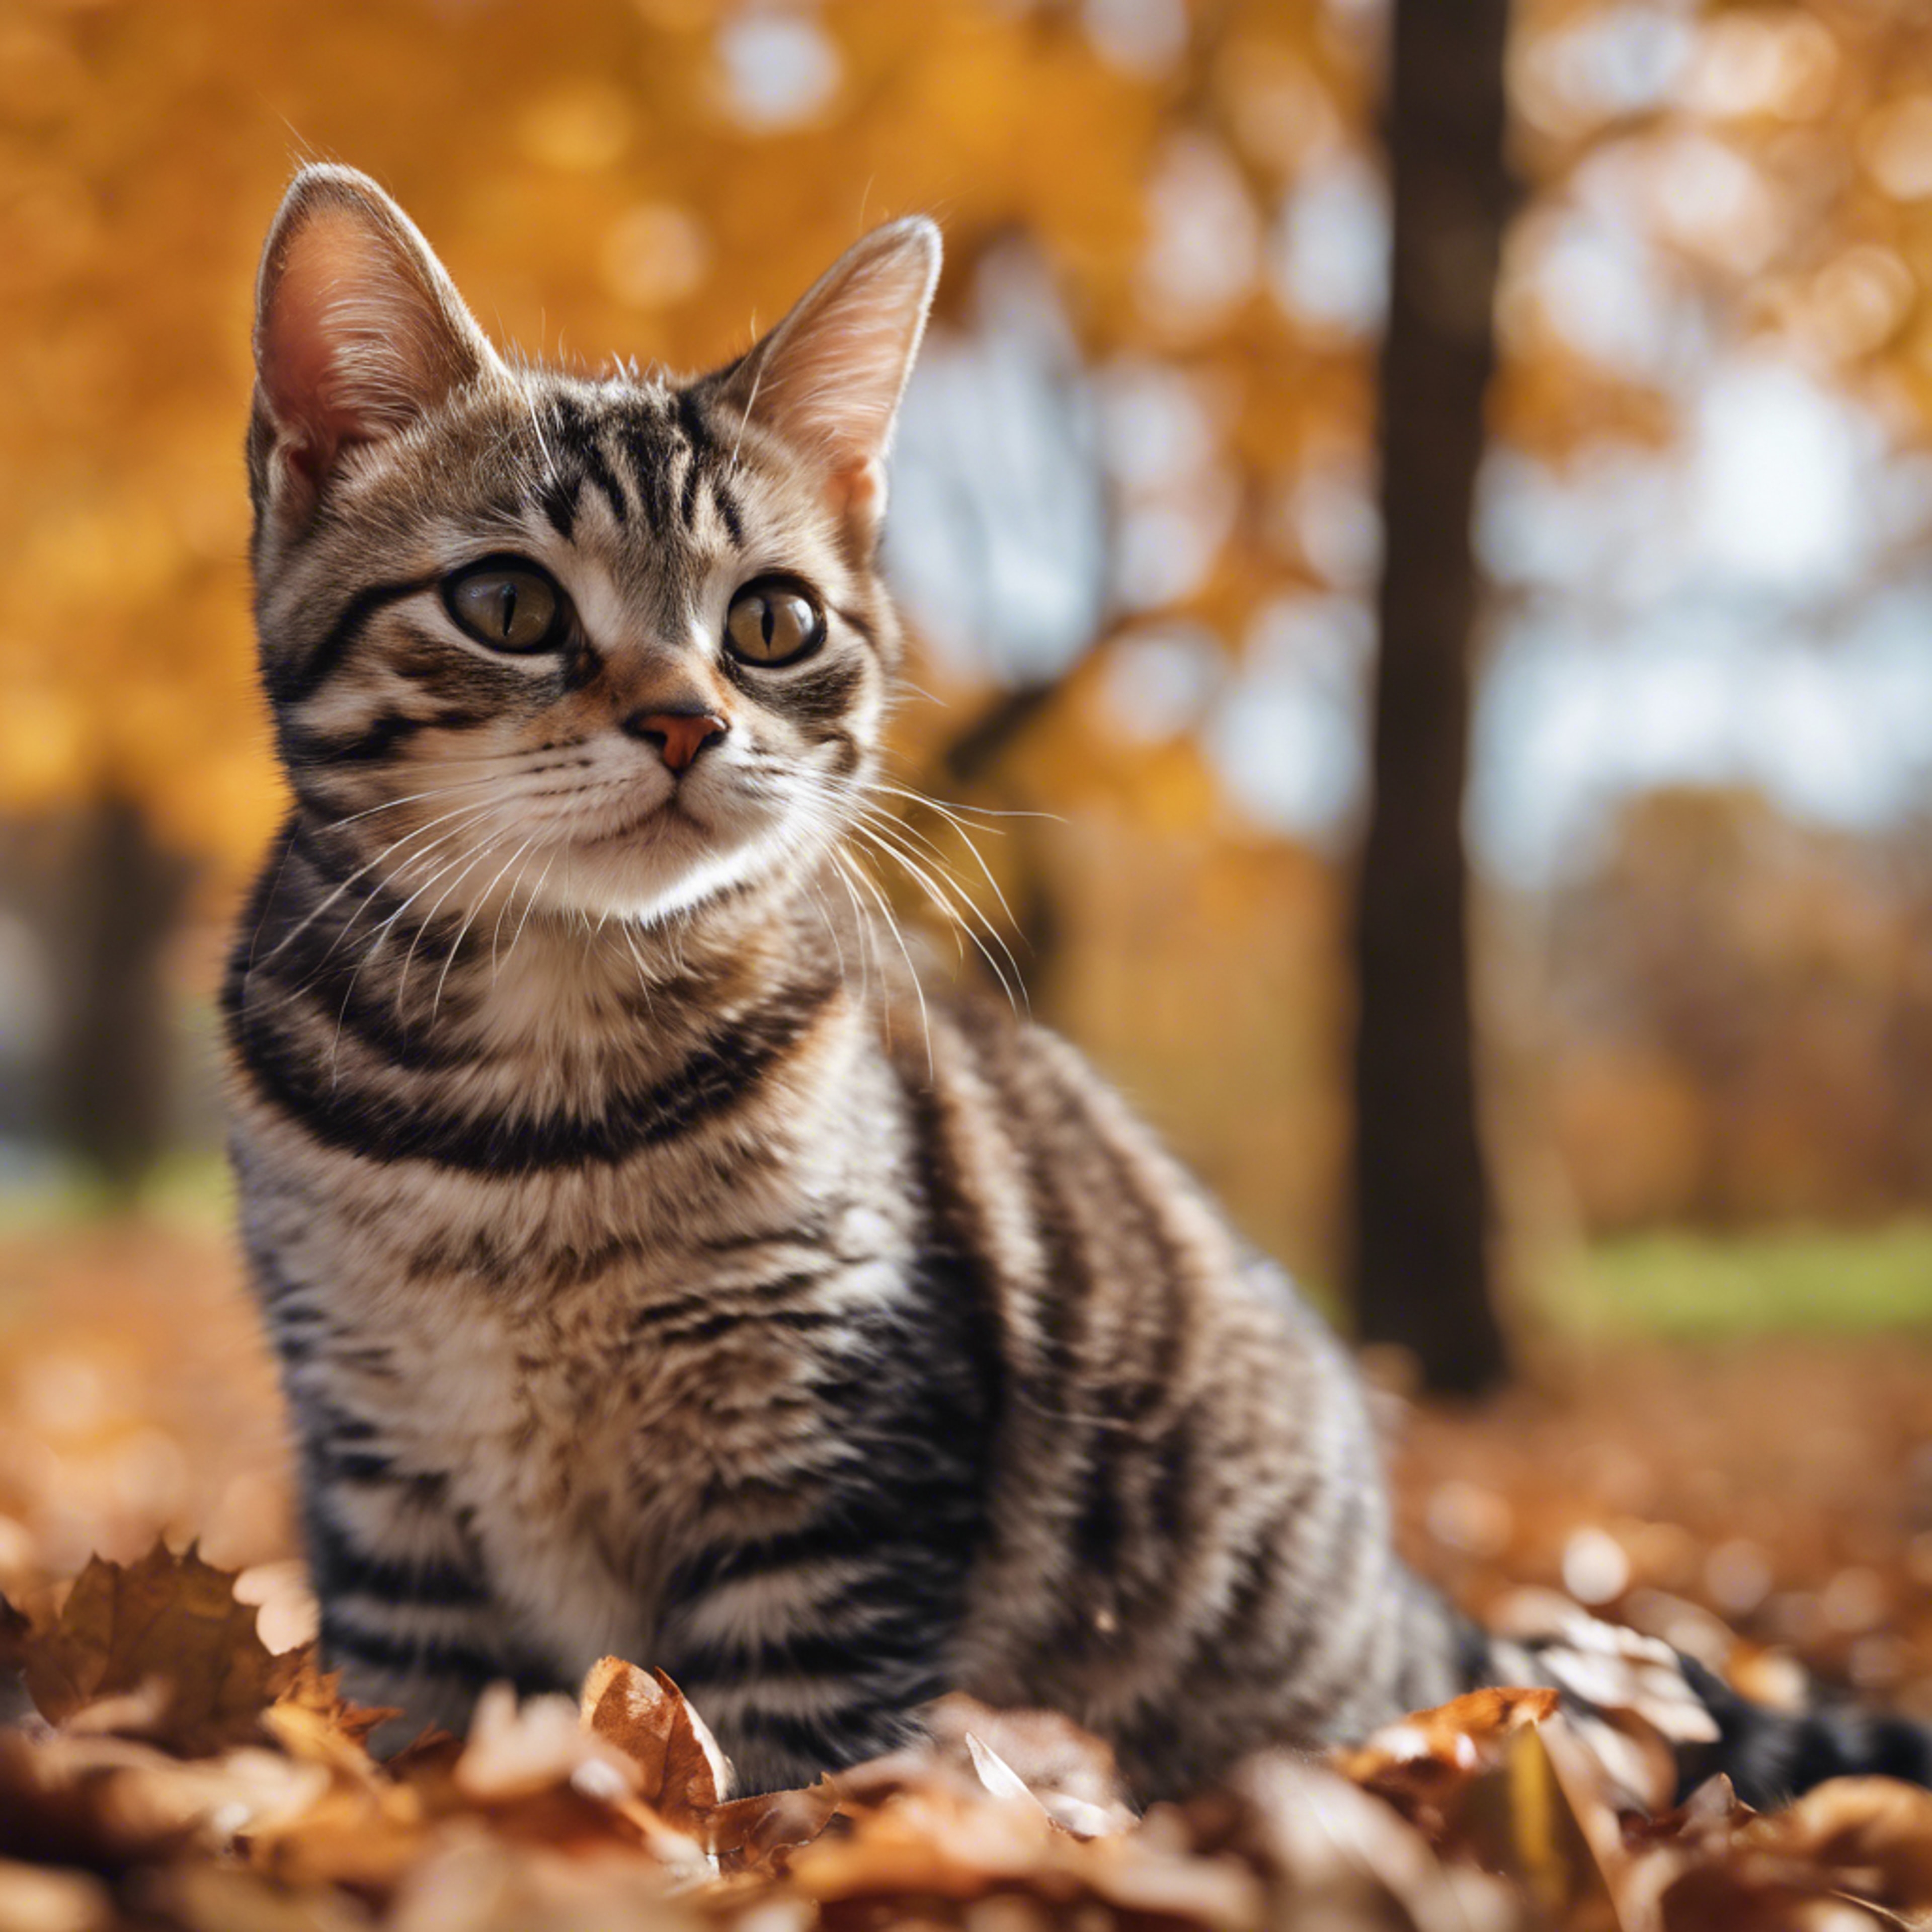 A classic brown tabby American Shorthair kitten lost in her daydreams, busy watching a world full of robust maple trees dancing with autumn winds.壁紙[94549d28d418408fbb13]